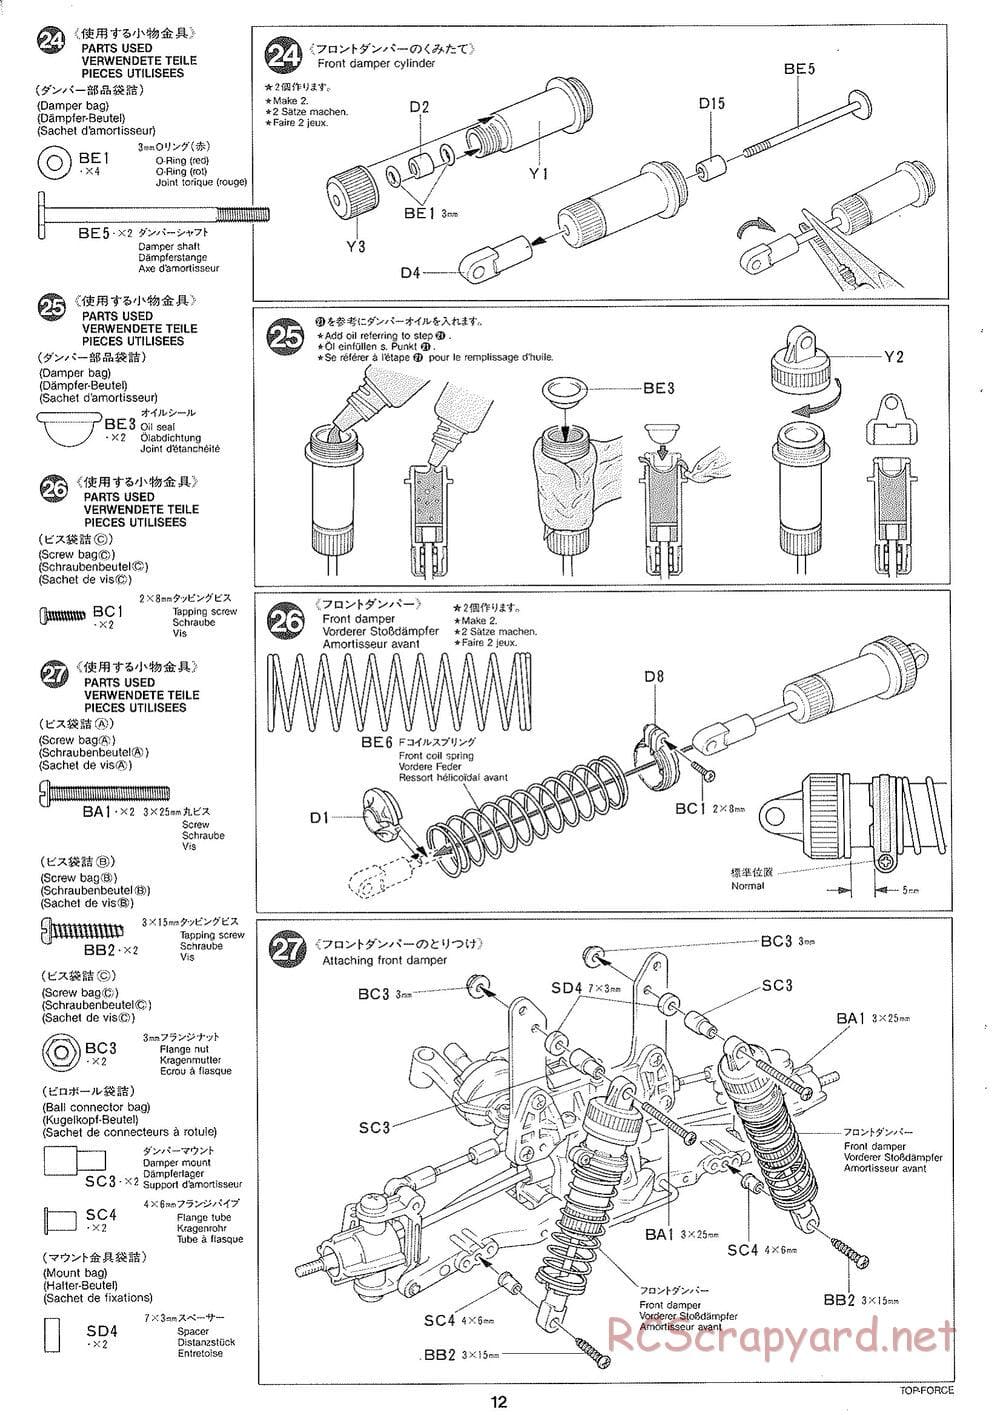 Tamiya - Top Force 2005 - DF-01 Chassis - Manual - Page 12